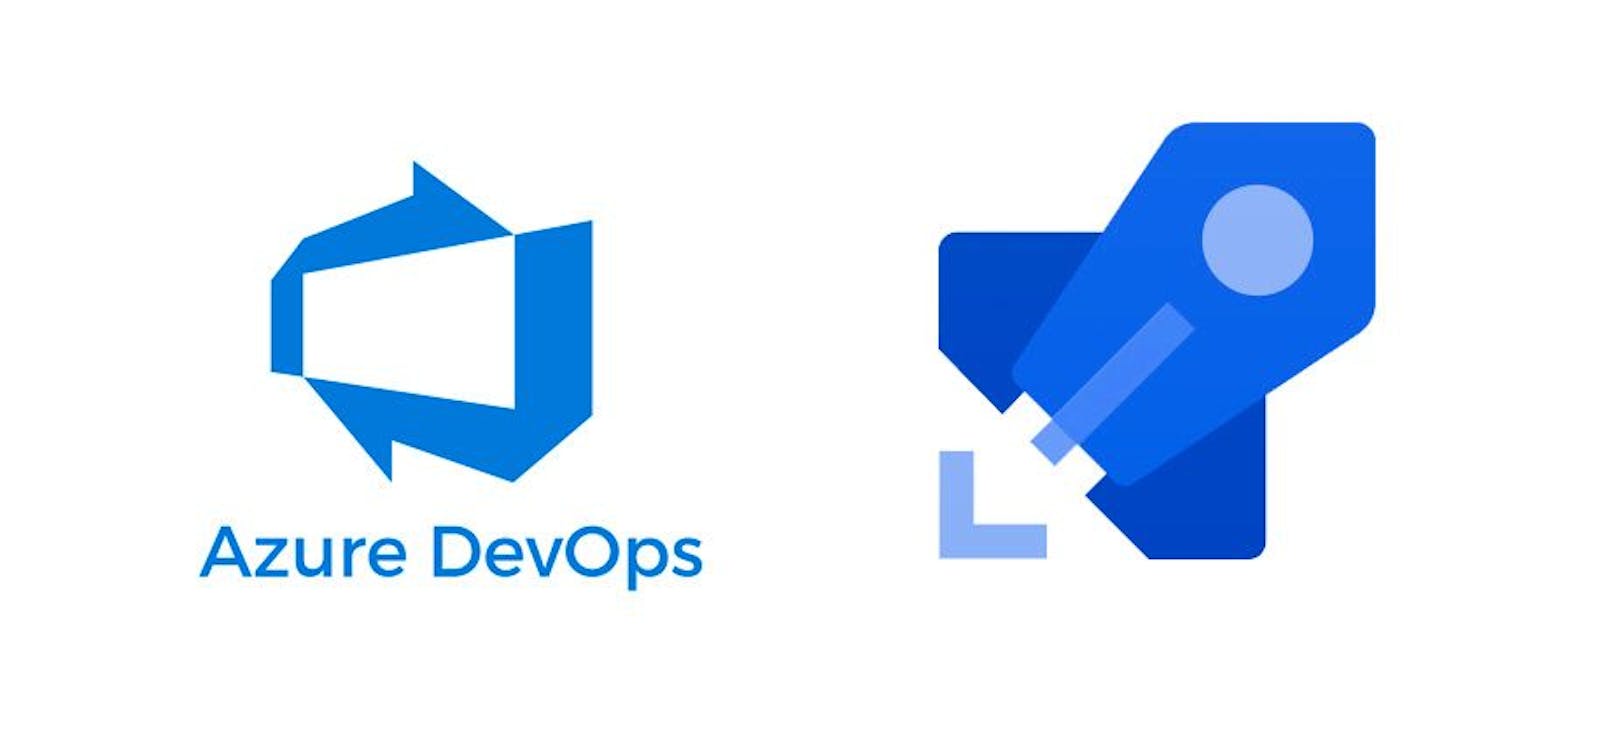 Building images in Azure DevOps and
running them in Azure